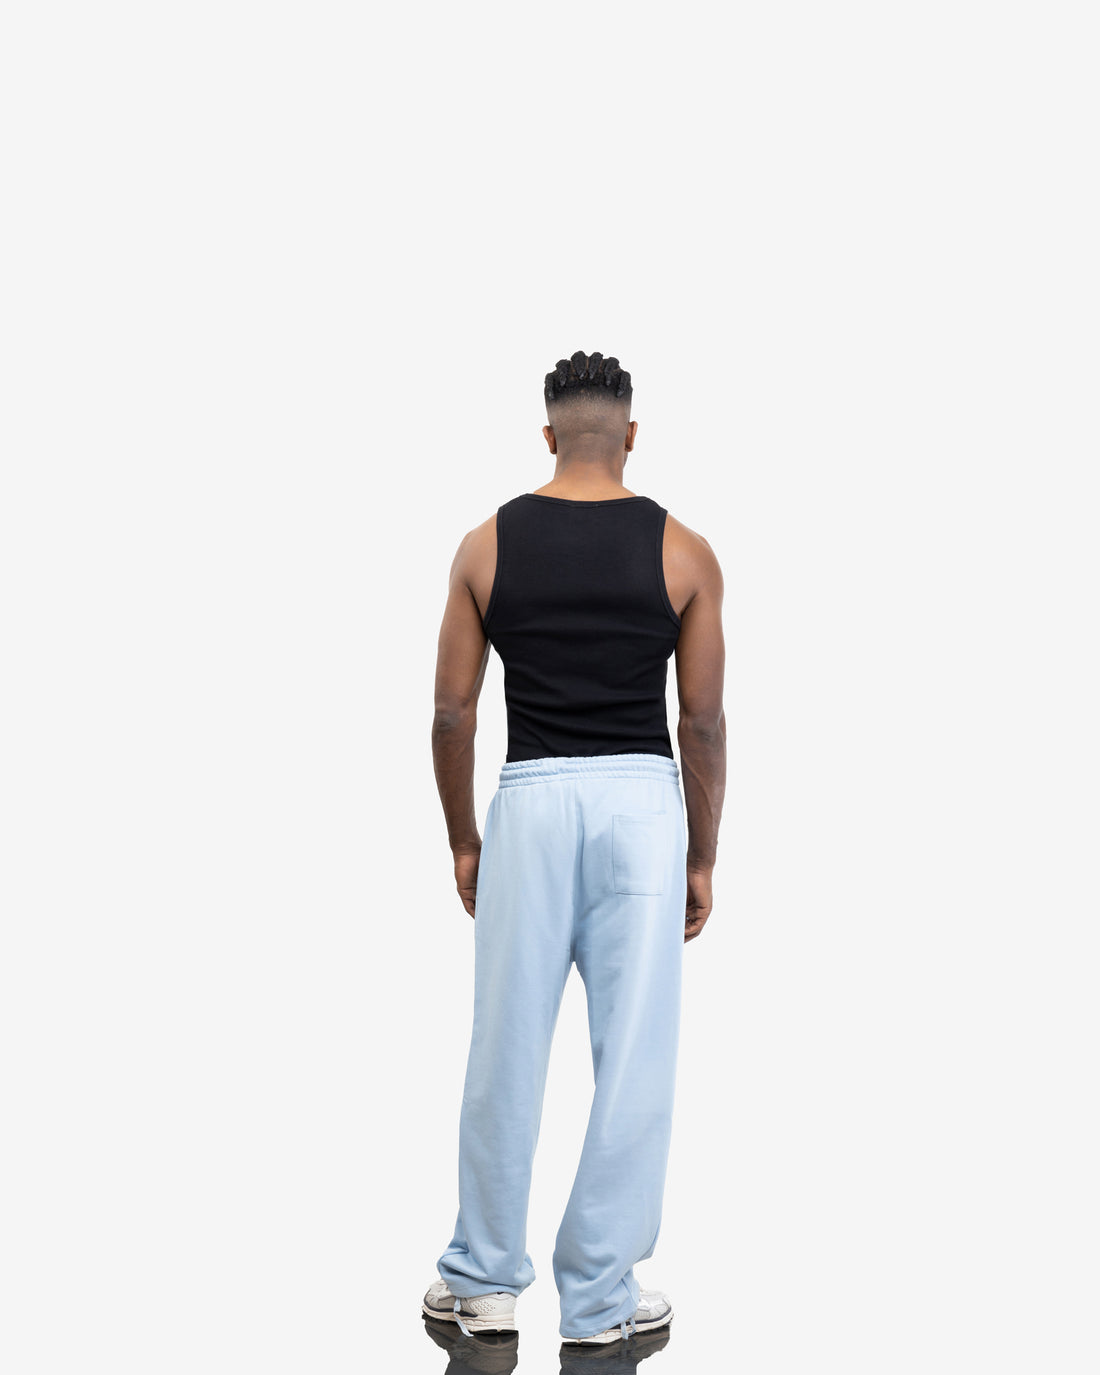 Masked Baggy Fit Sweatpant